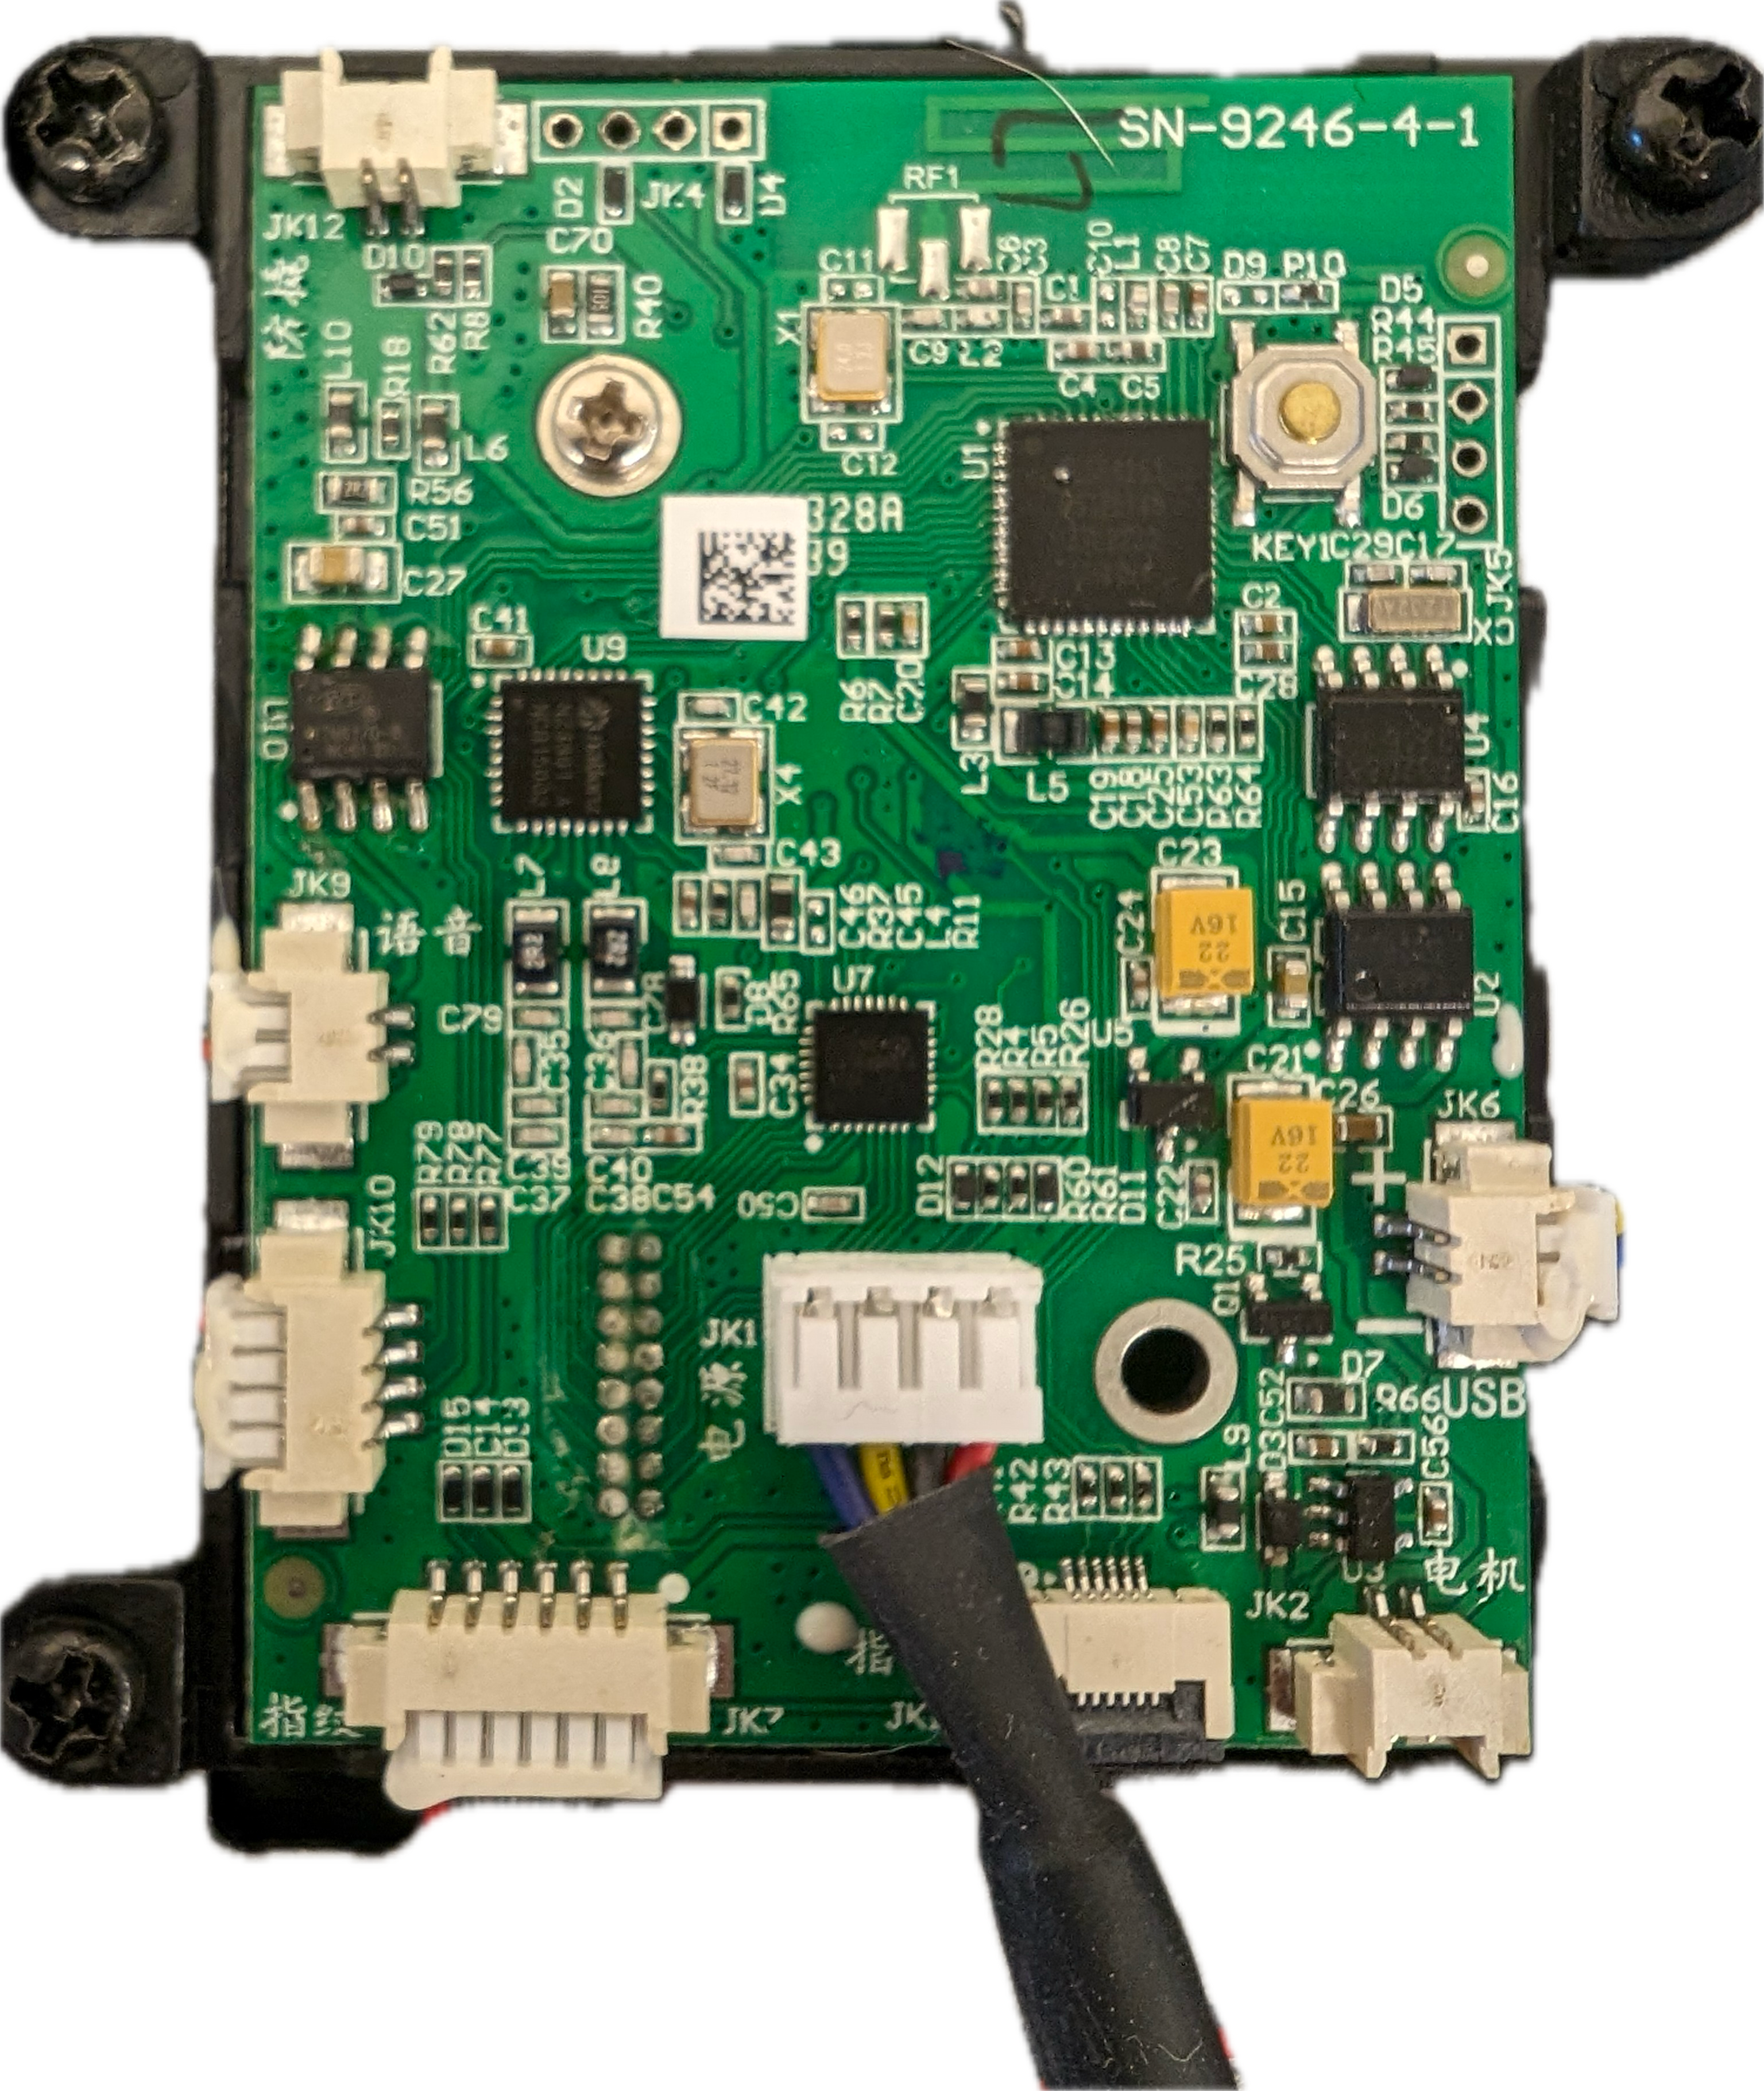 Mainboard of the outside unit